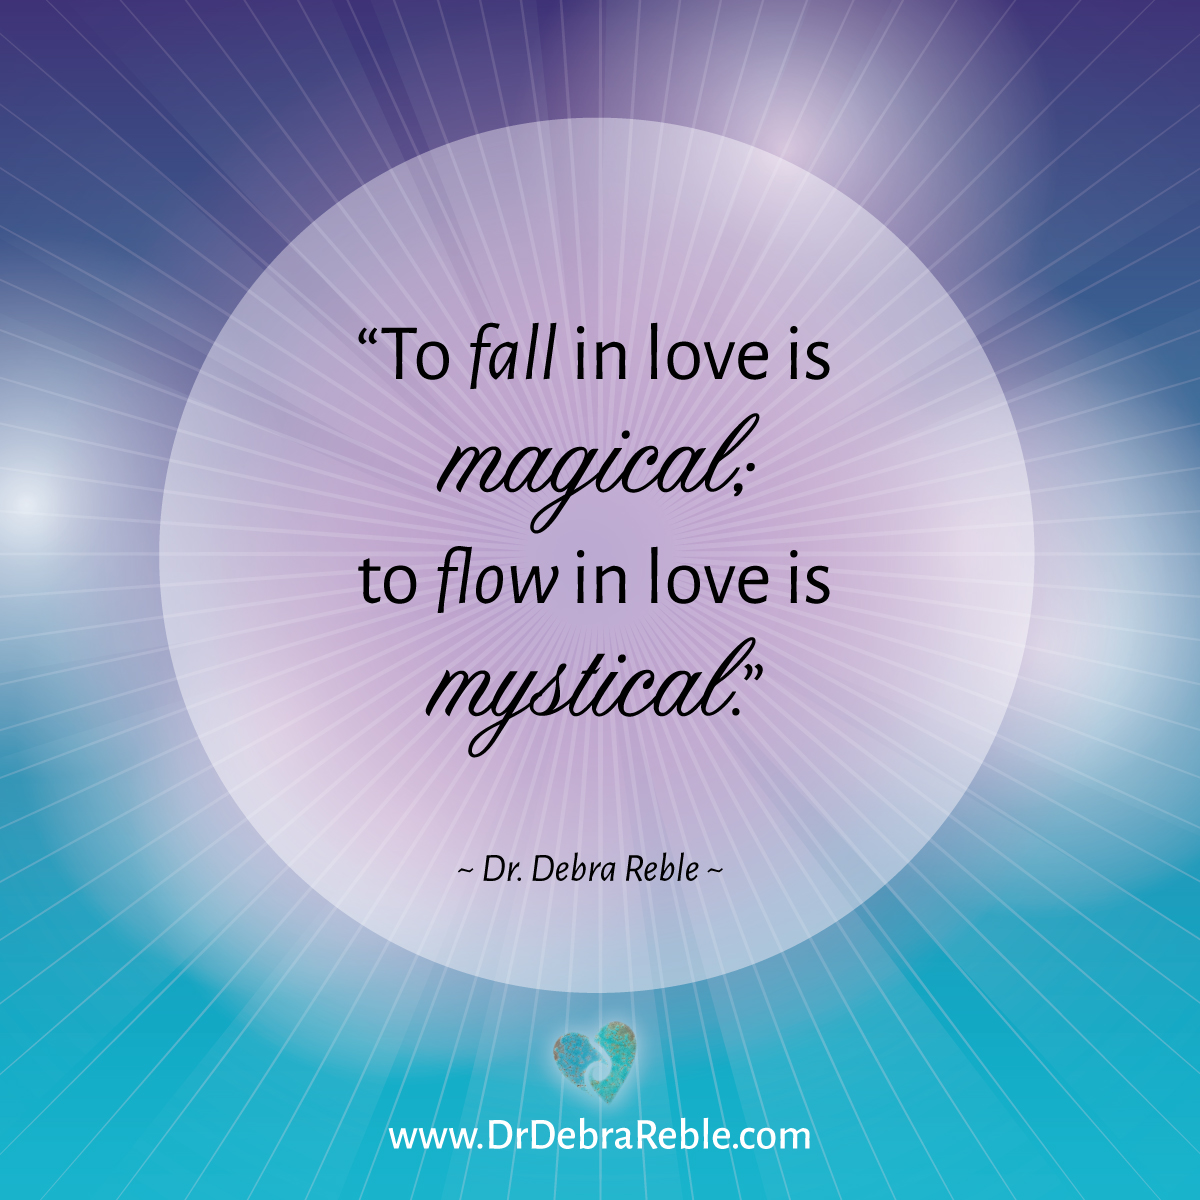  QUOTE  To fall in love  is magical  to flow in love  is 